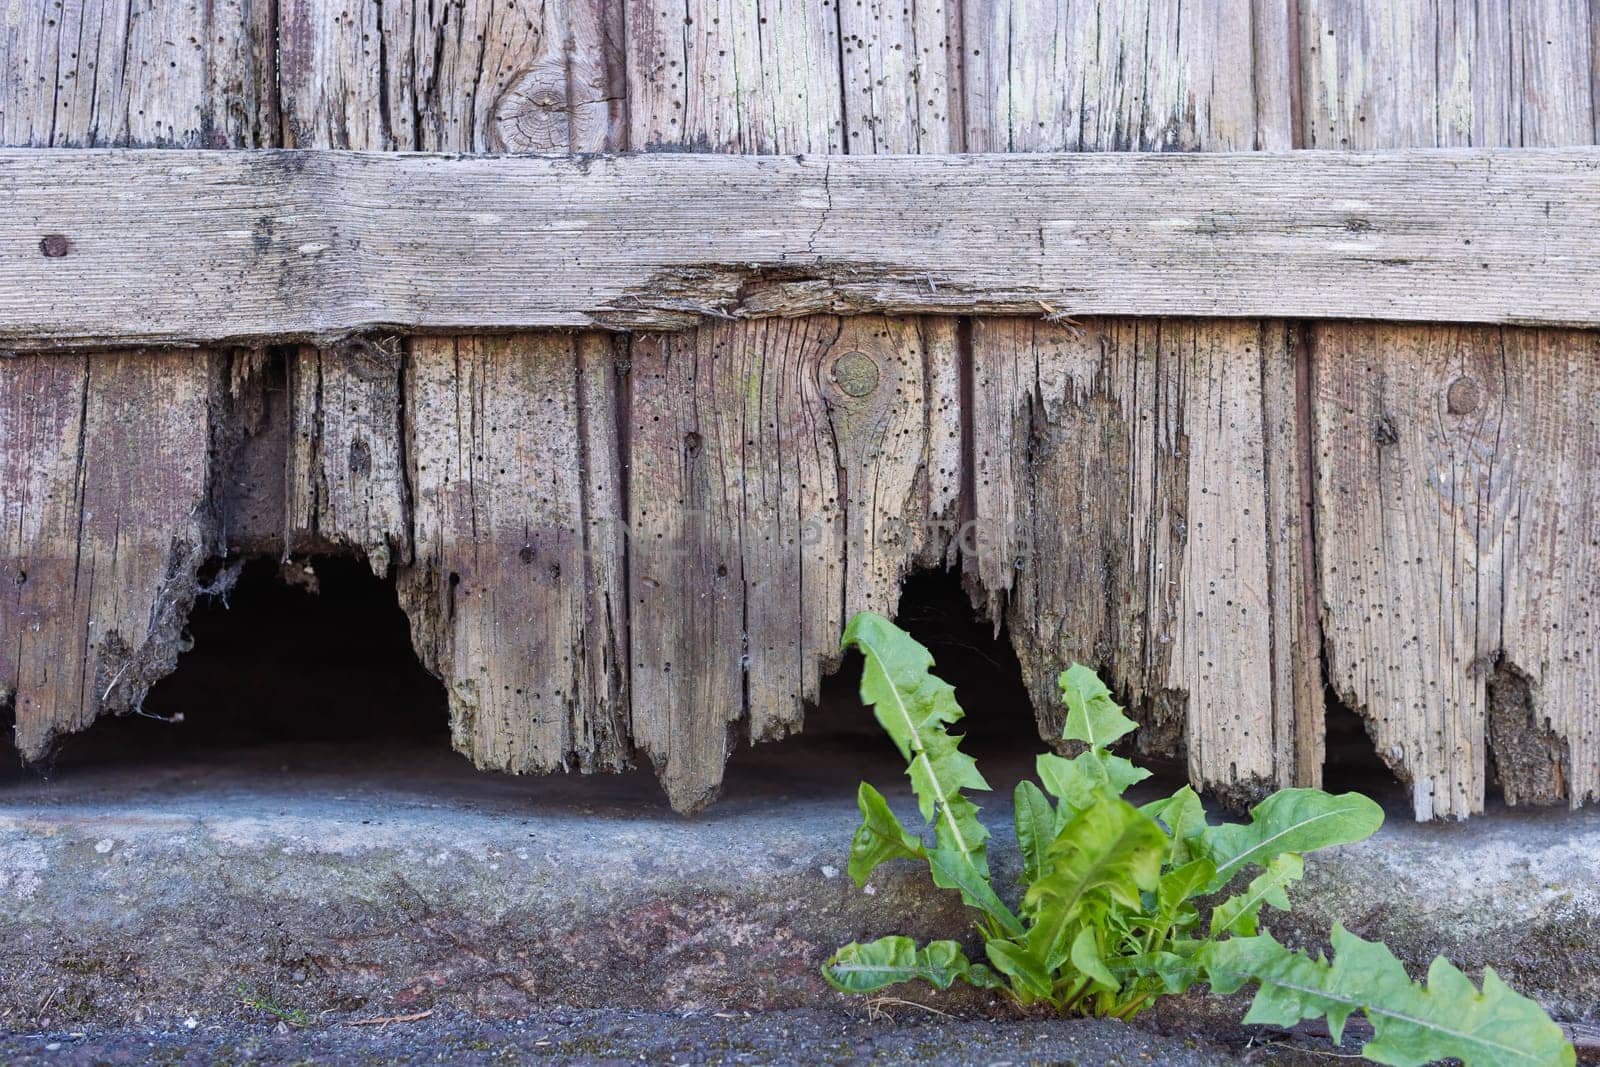 the old wooden fence is all rotten. The bottom of the fence is a close-up. High quality photo